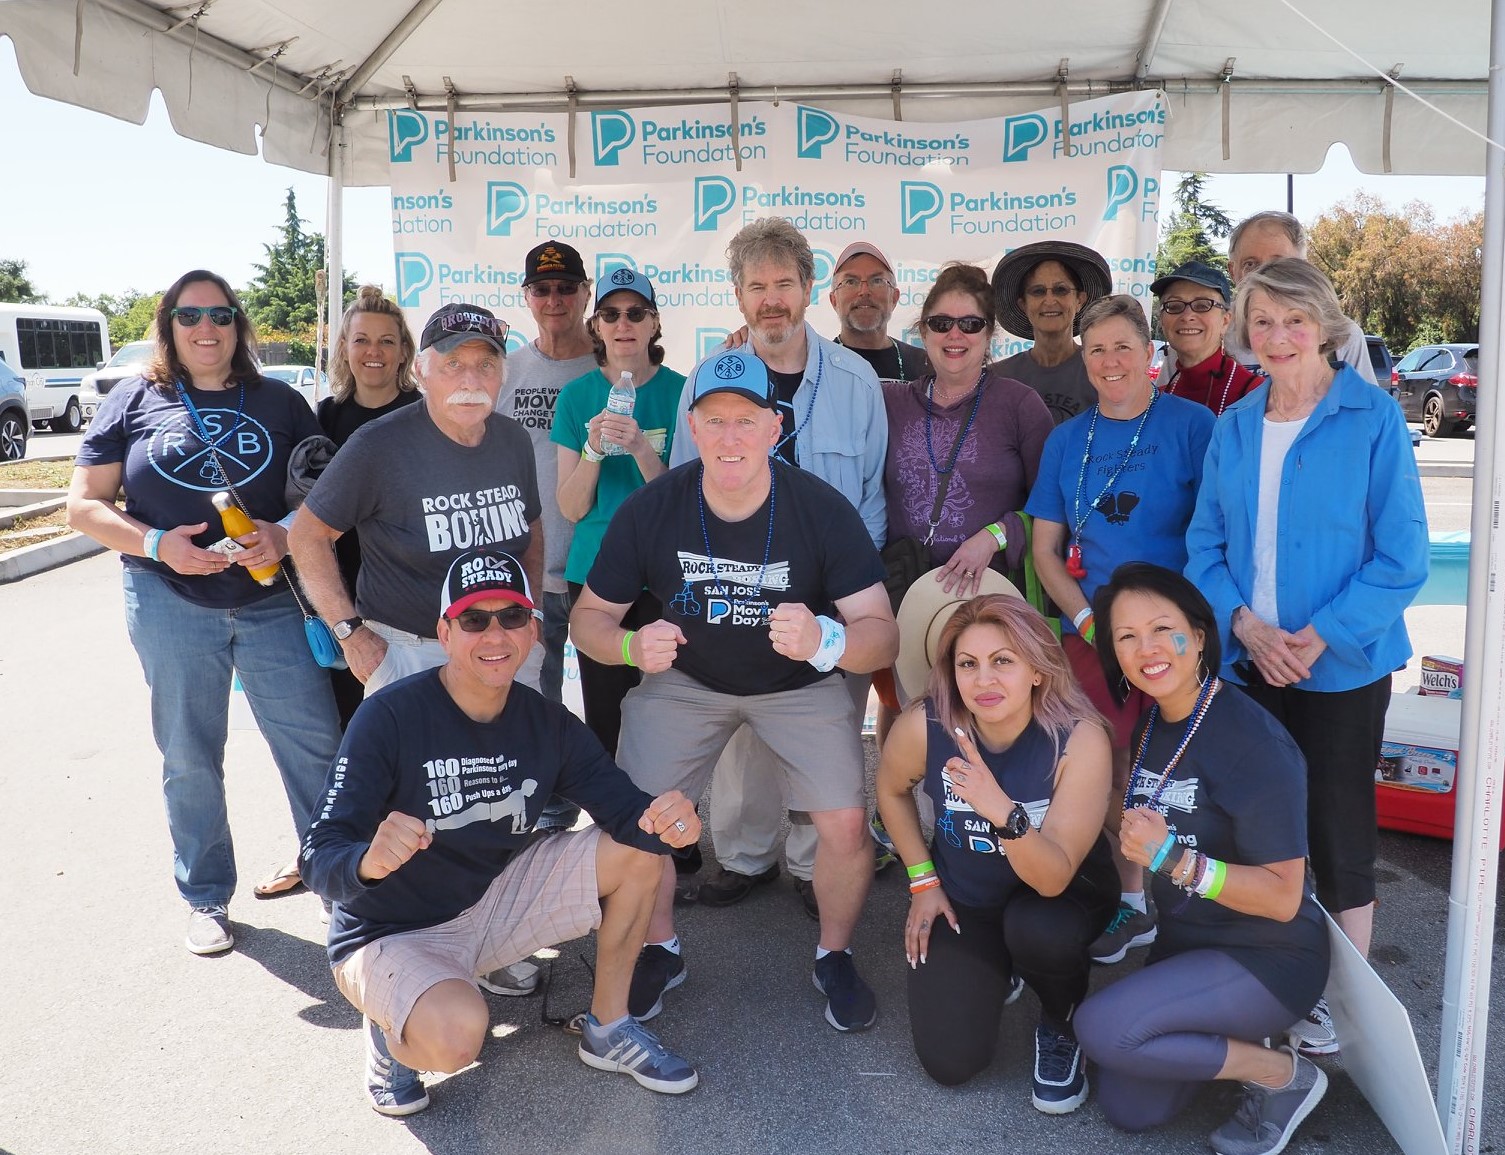 Moving Day San Jose Raises Funds and Awareness for Parkinson’s Disease